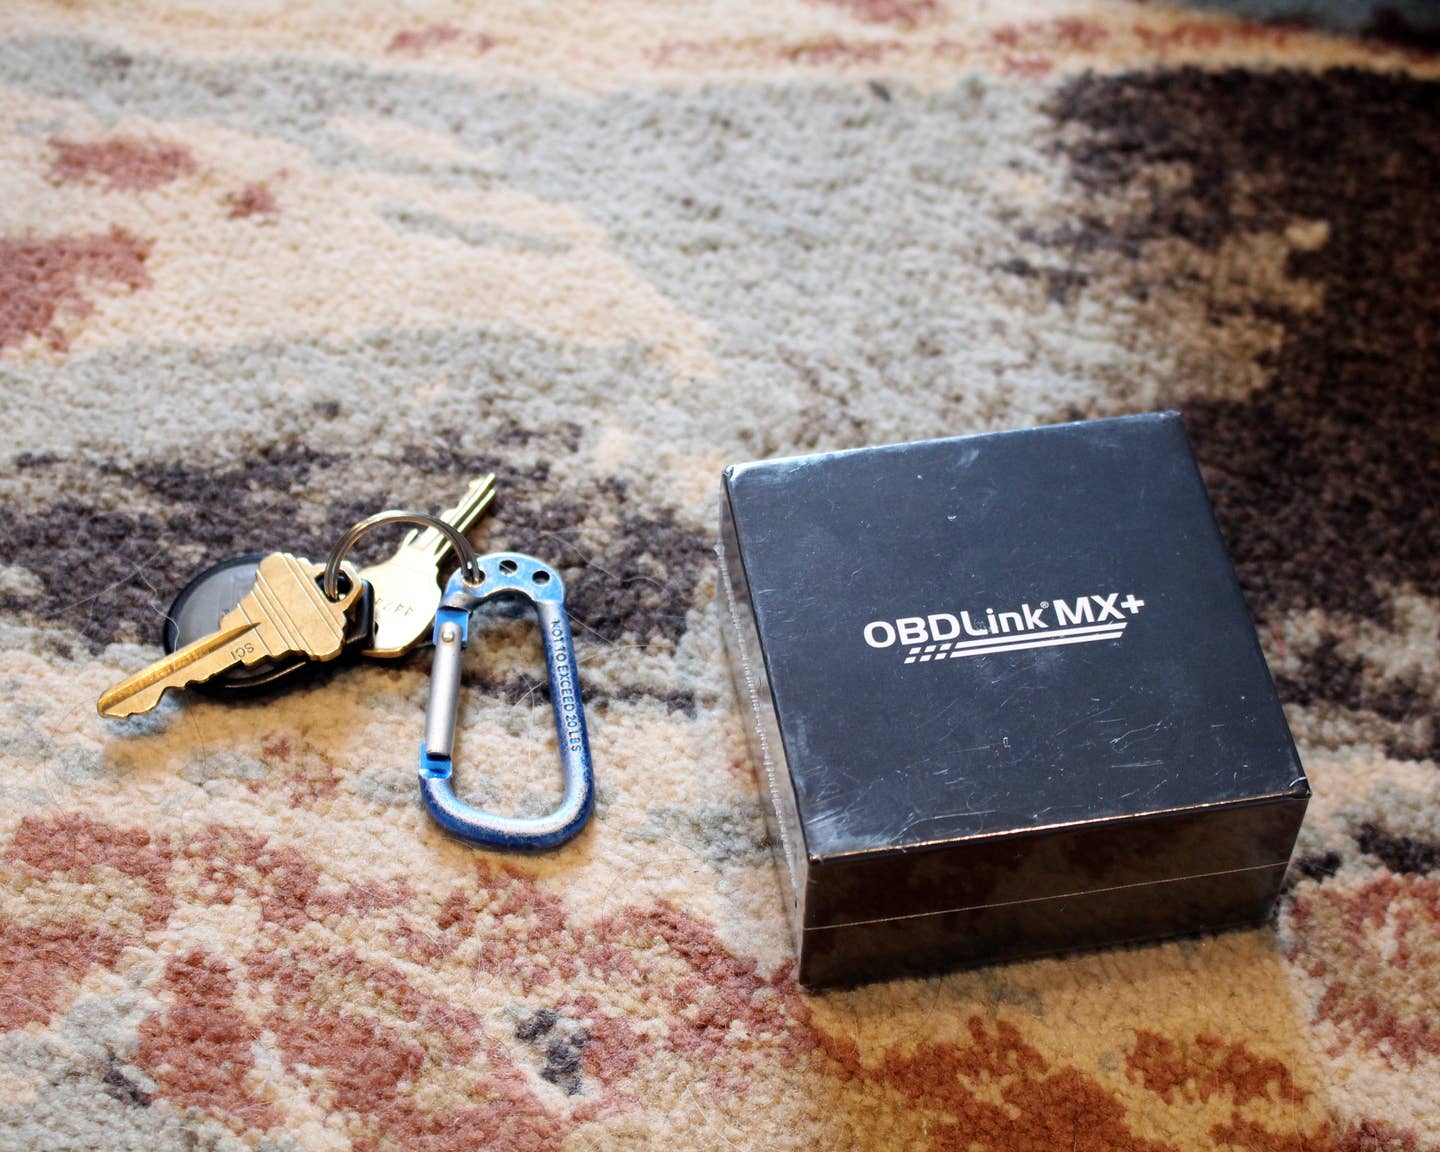 An OBDLink MX+ black box next to keys on top of a multi-colored carpet.